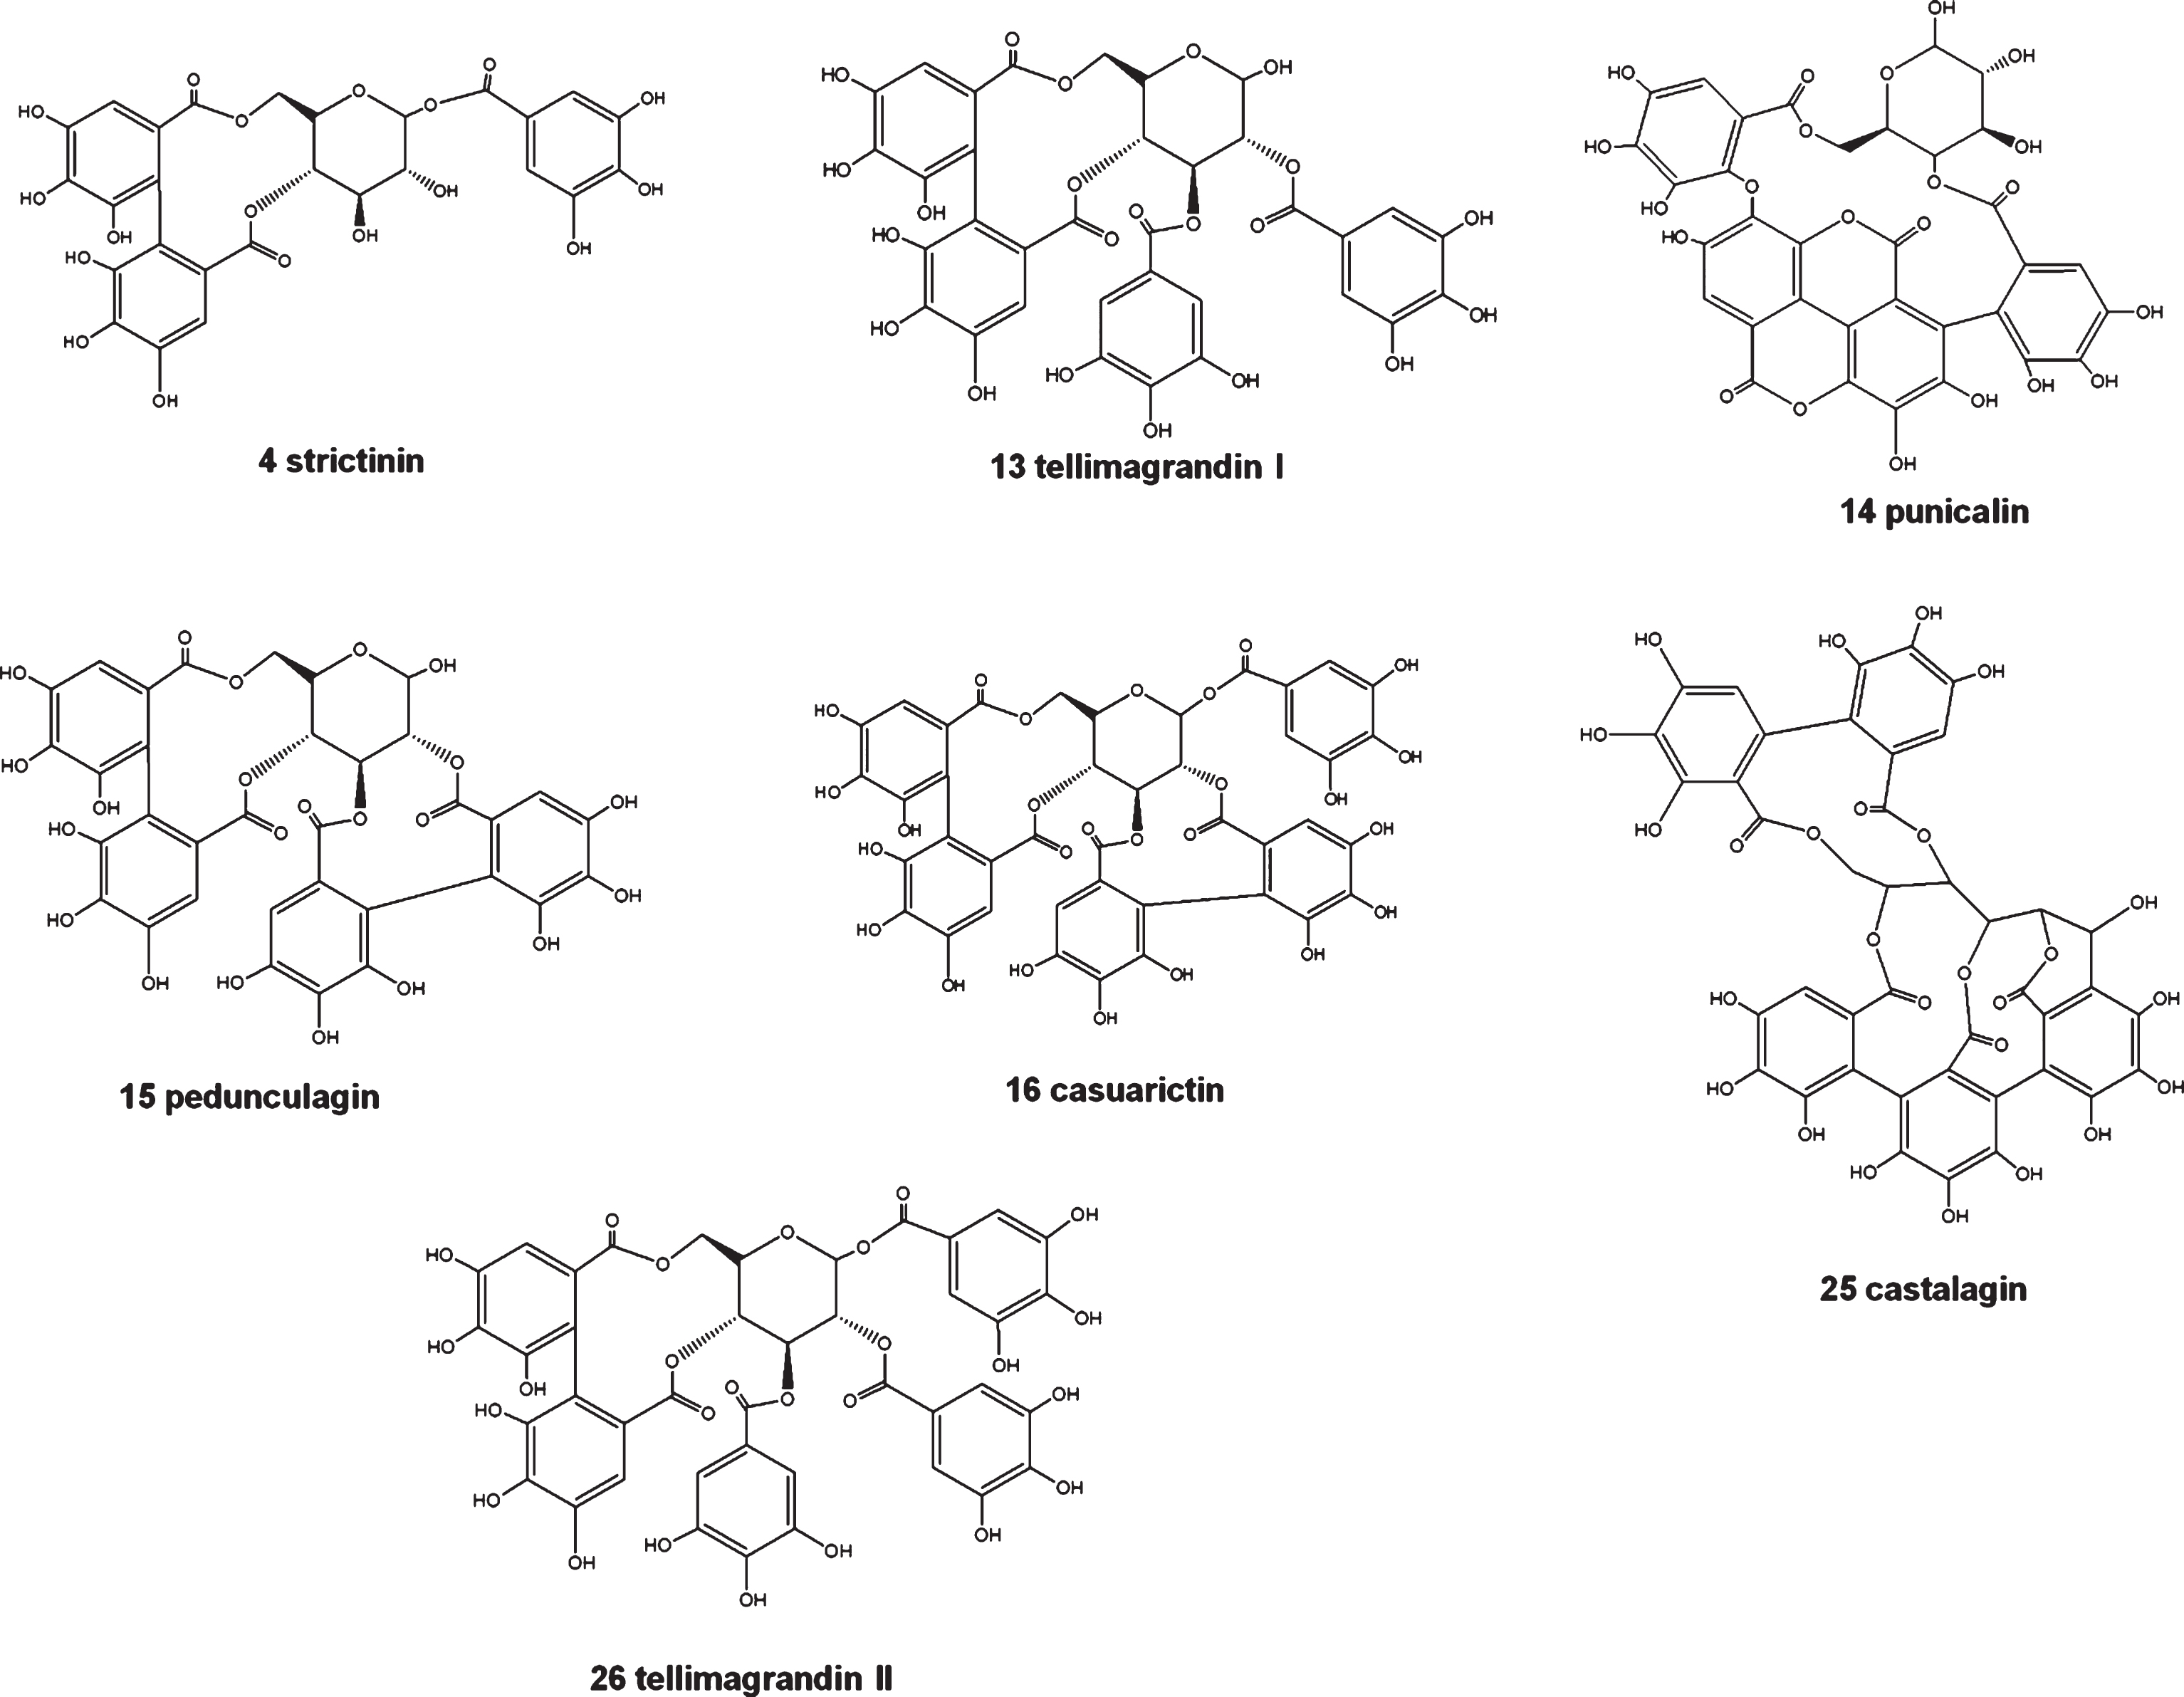 Chemical structures of hydrolysable tannins tentatively identified for the first time in different parts of myrtle berries.